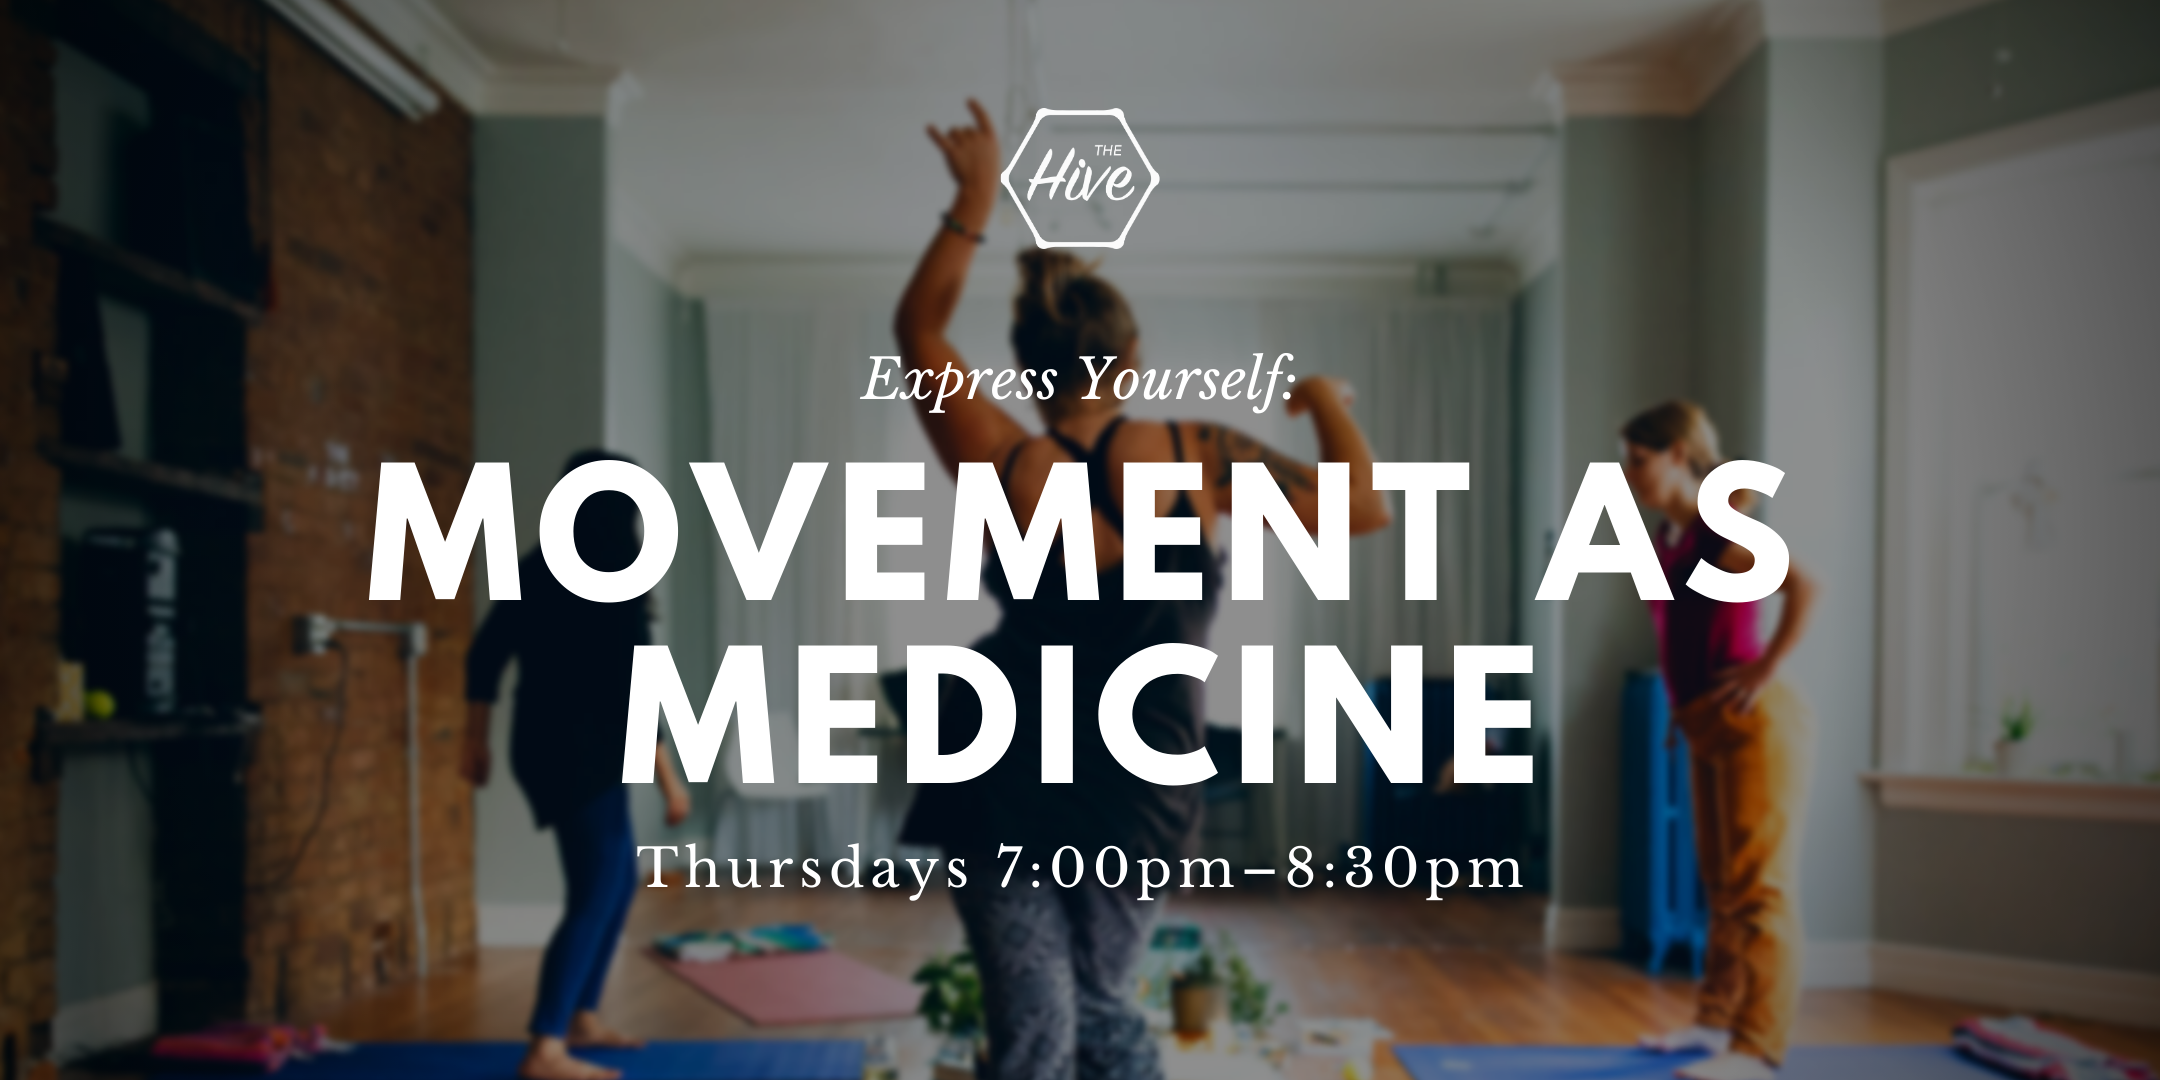 Express Yourself: Movement as Medicine